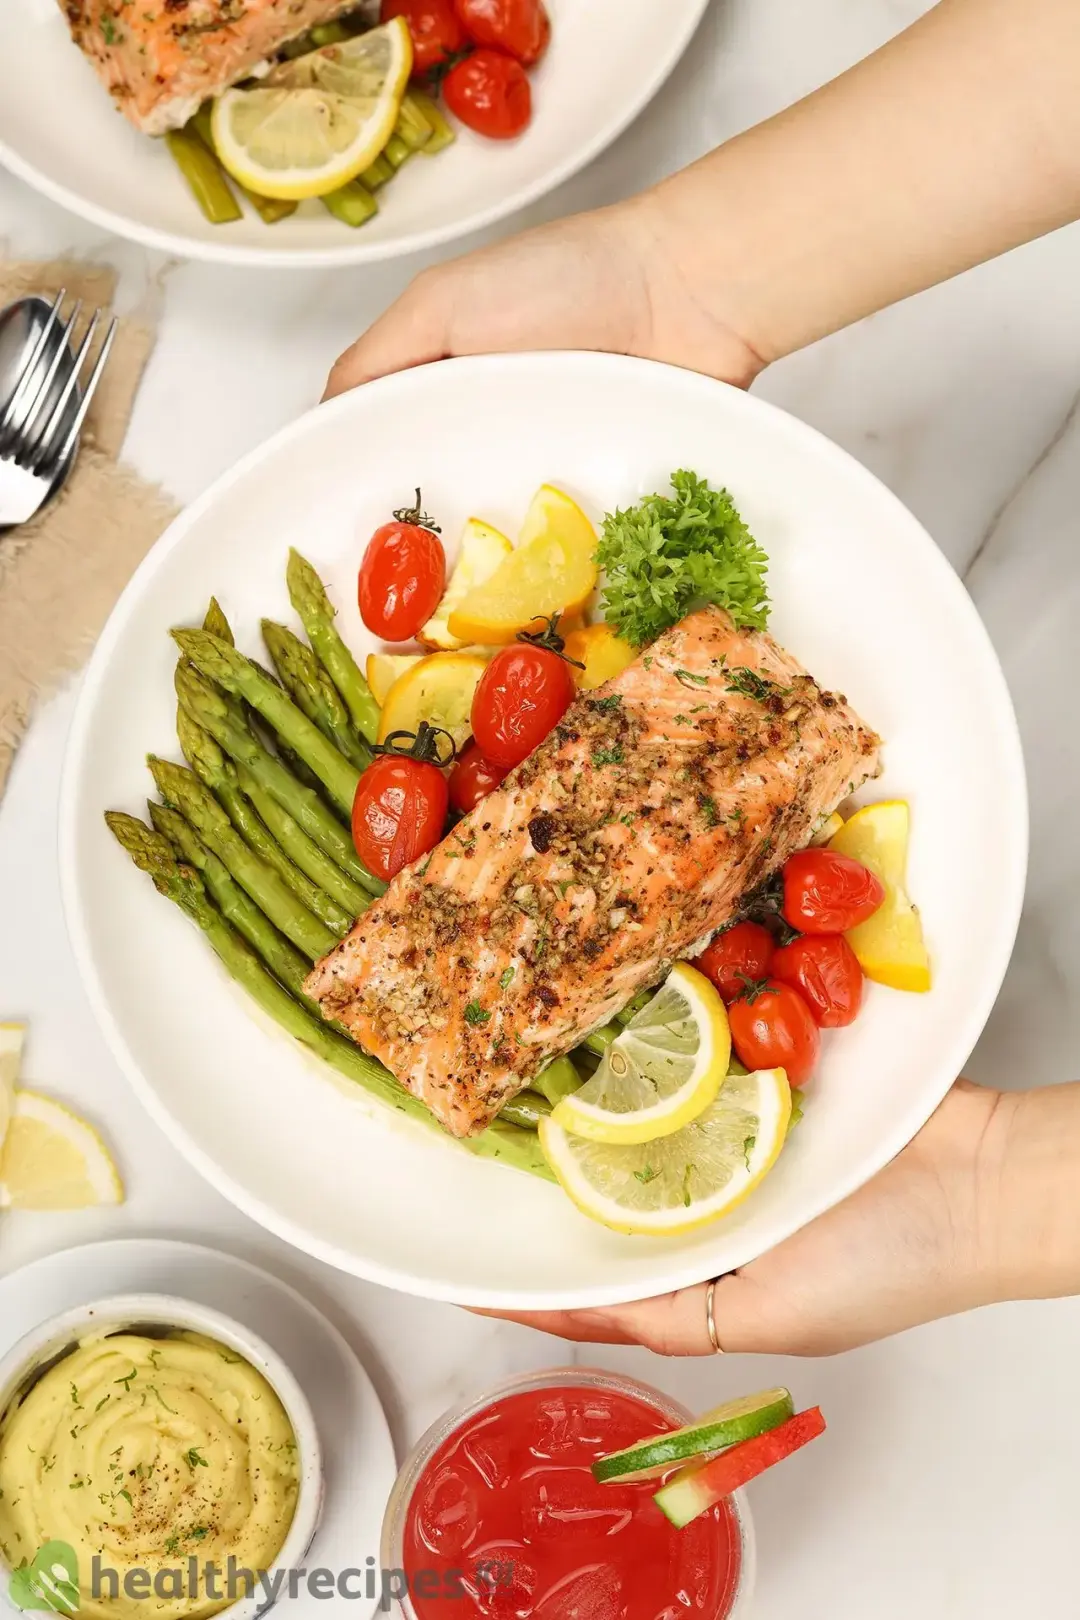 A piece of baked salmon fillet on a bed of vegetables including asparagus, cherry tomatoes, zucchini slices, and slices of lemon